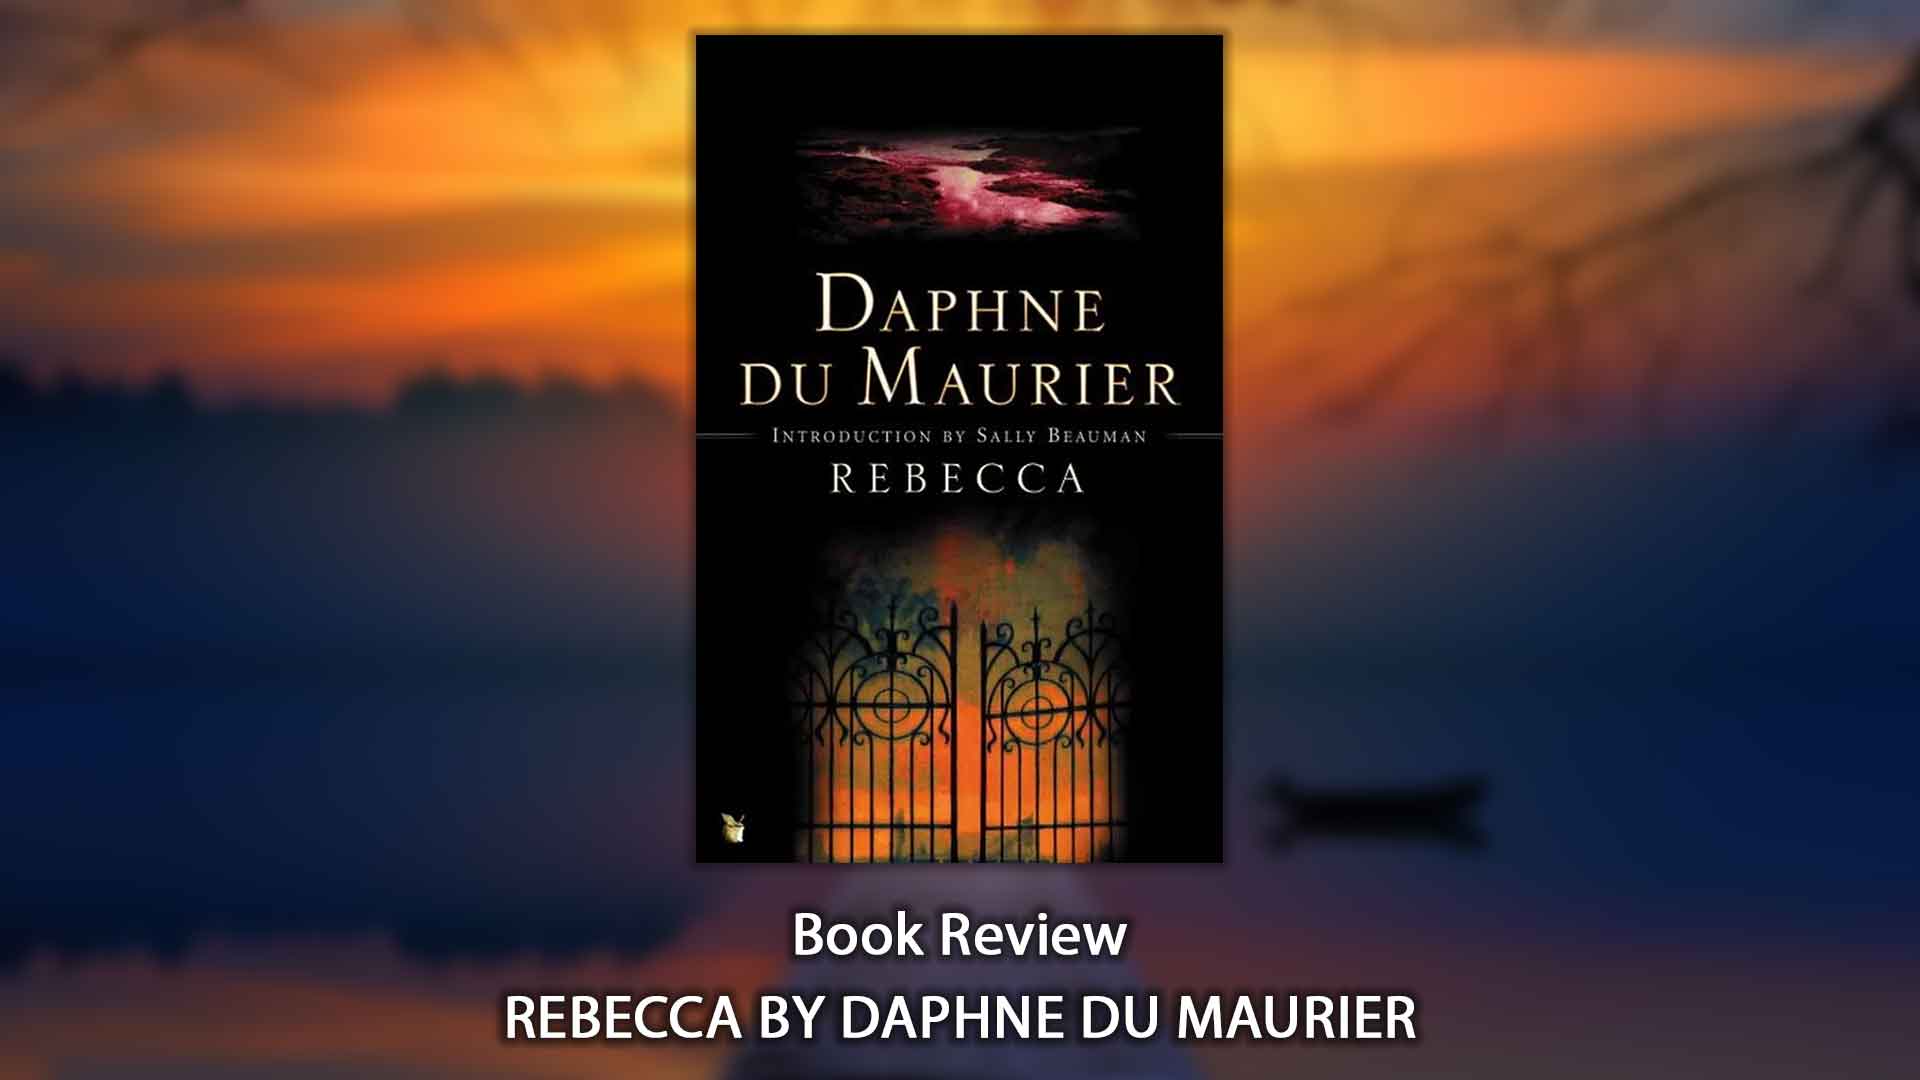 rebecca book review summary by daphne du maurier